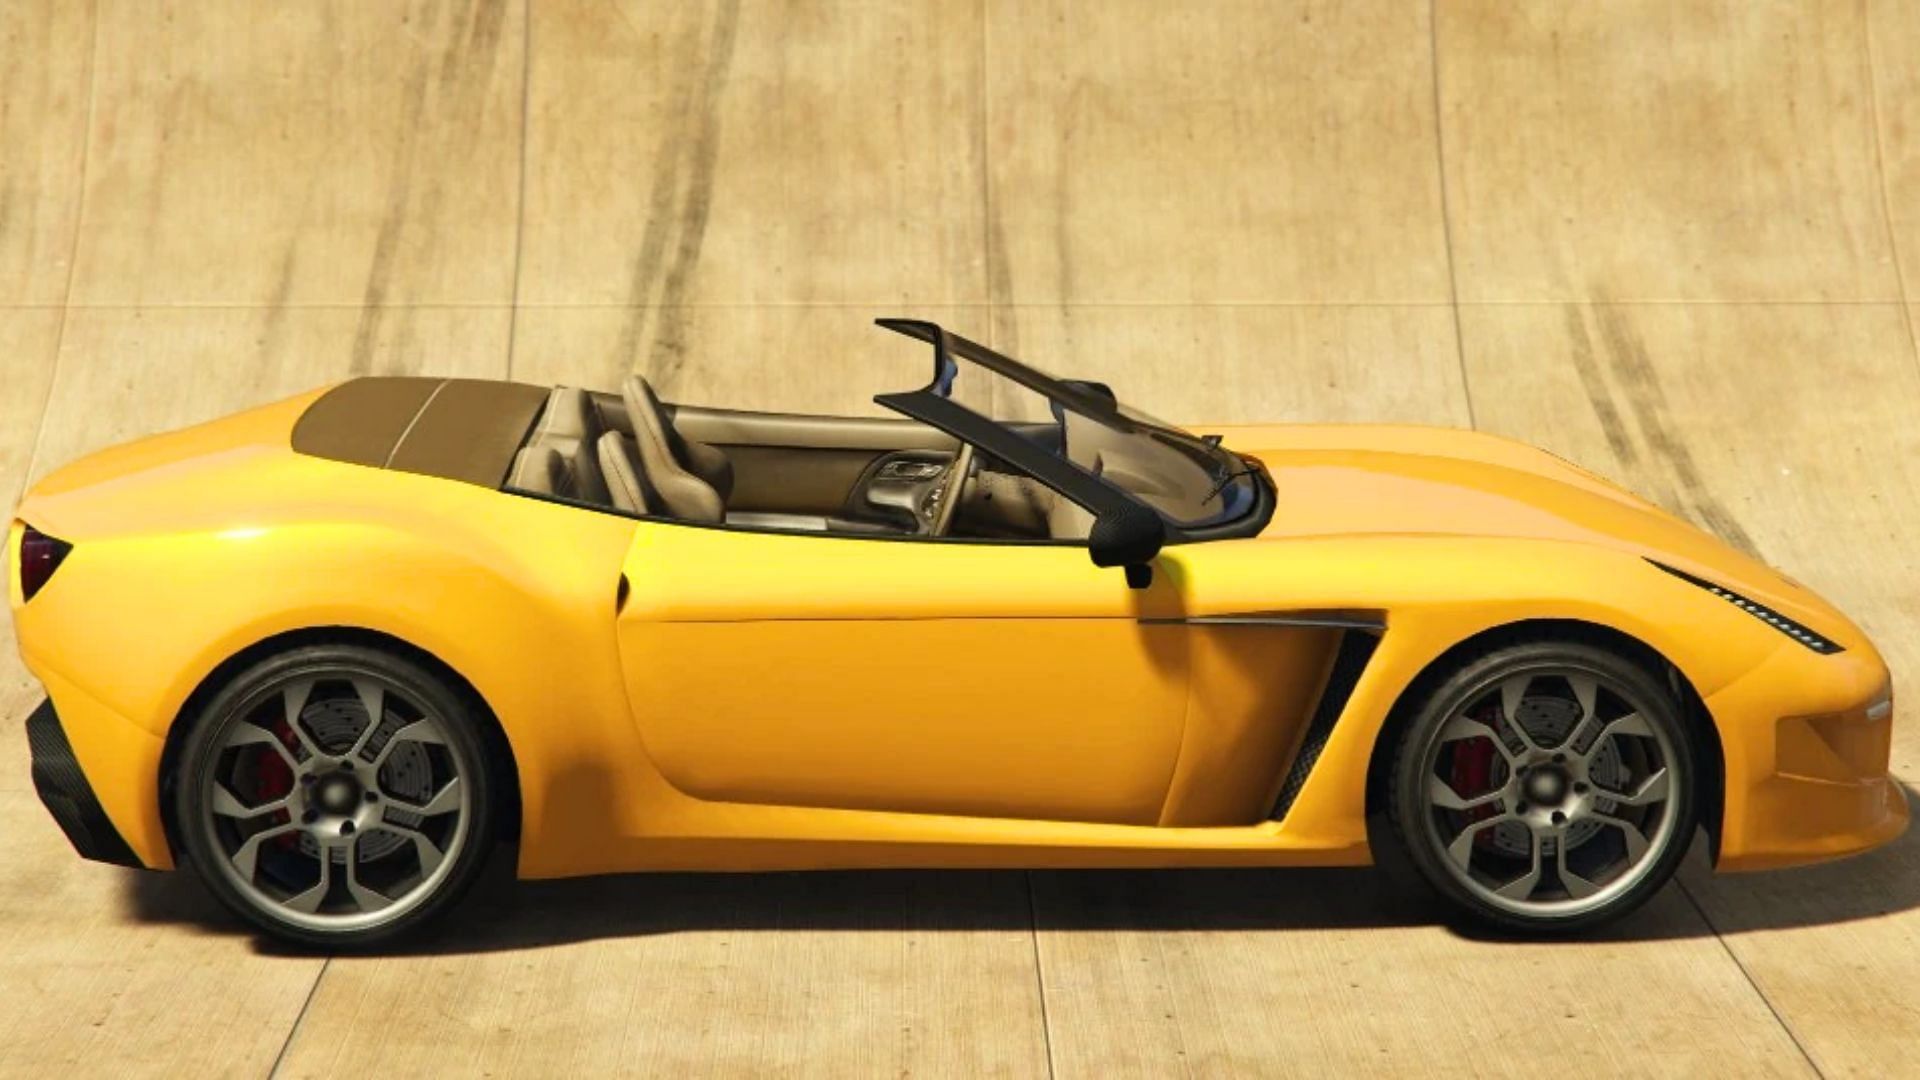 The Grotti Carbonizzare with its roof folded (Image via GTA Wiki)